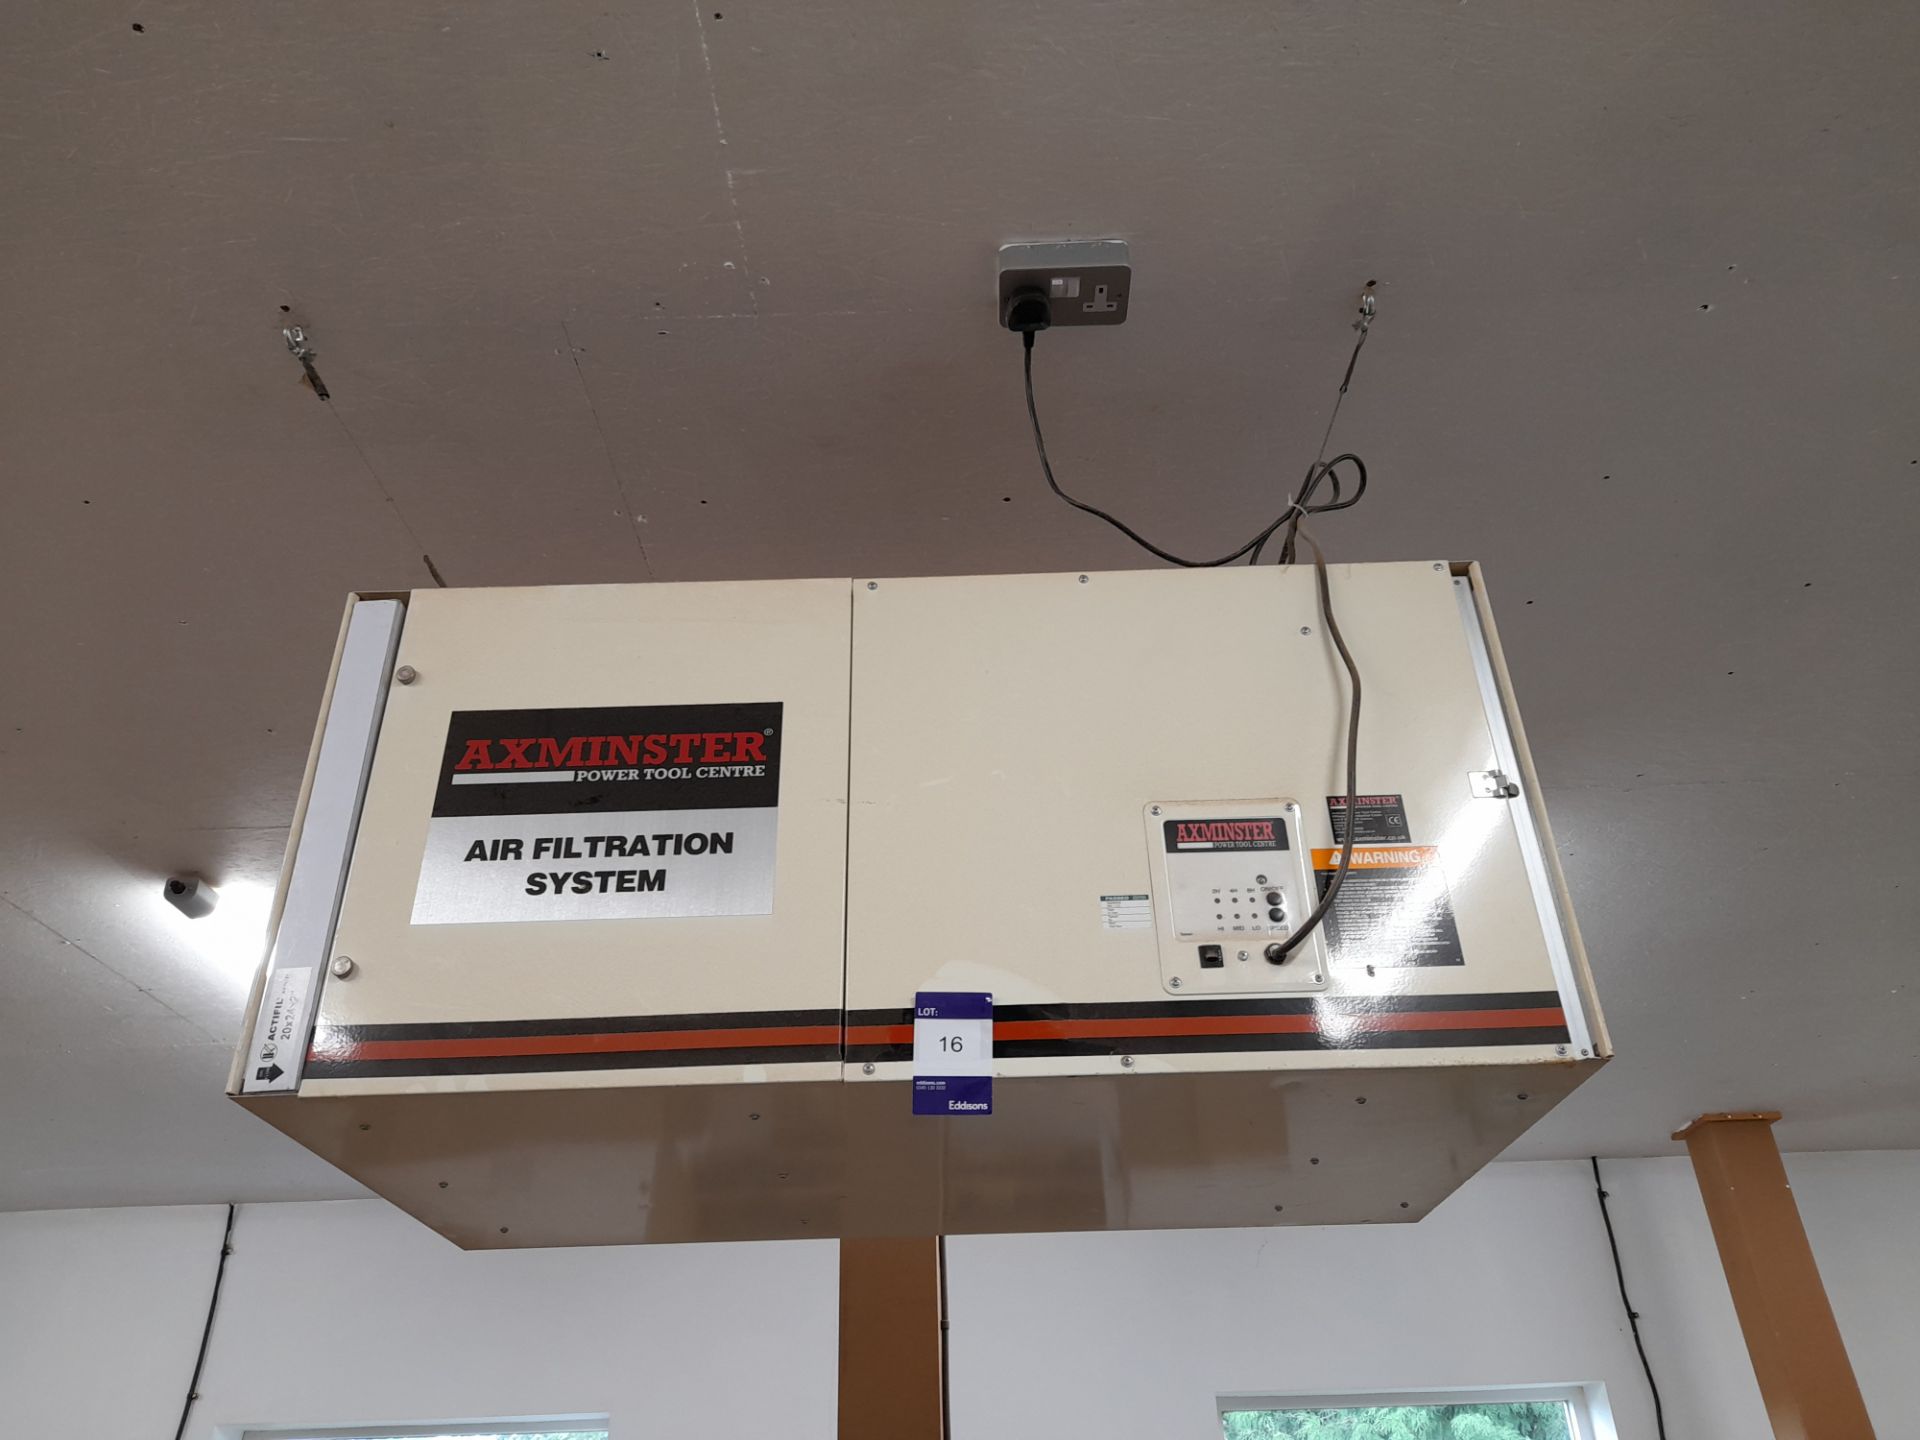 Axminster roof mounted 240V air filtration system (Located in Axminster, Devon)